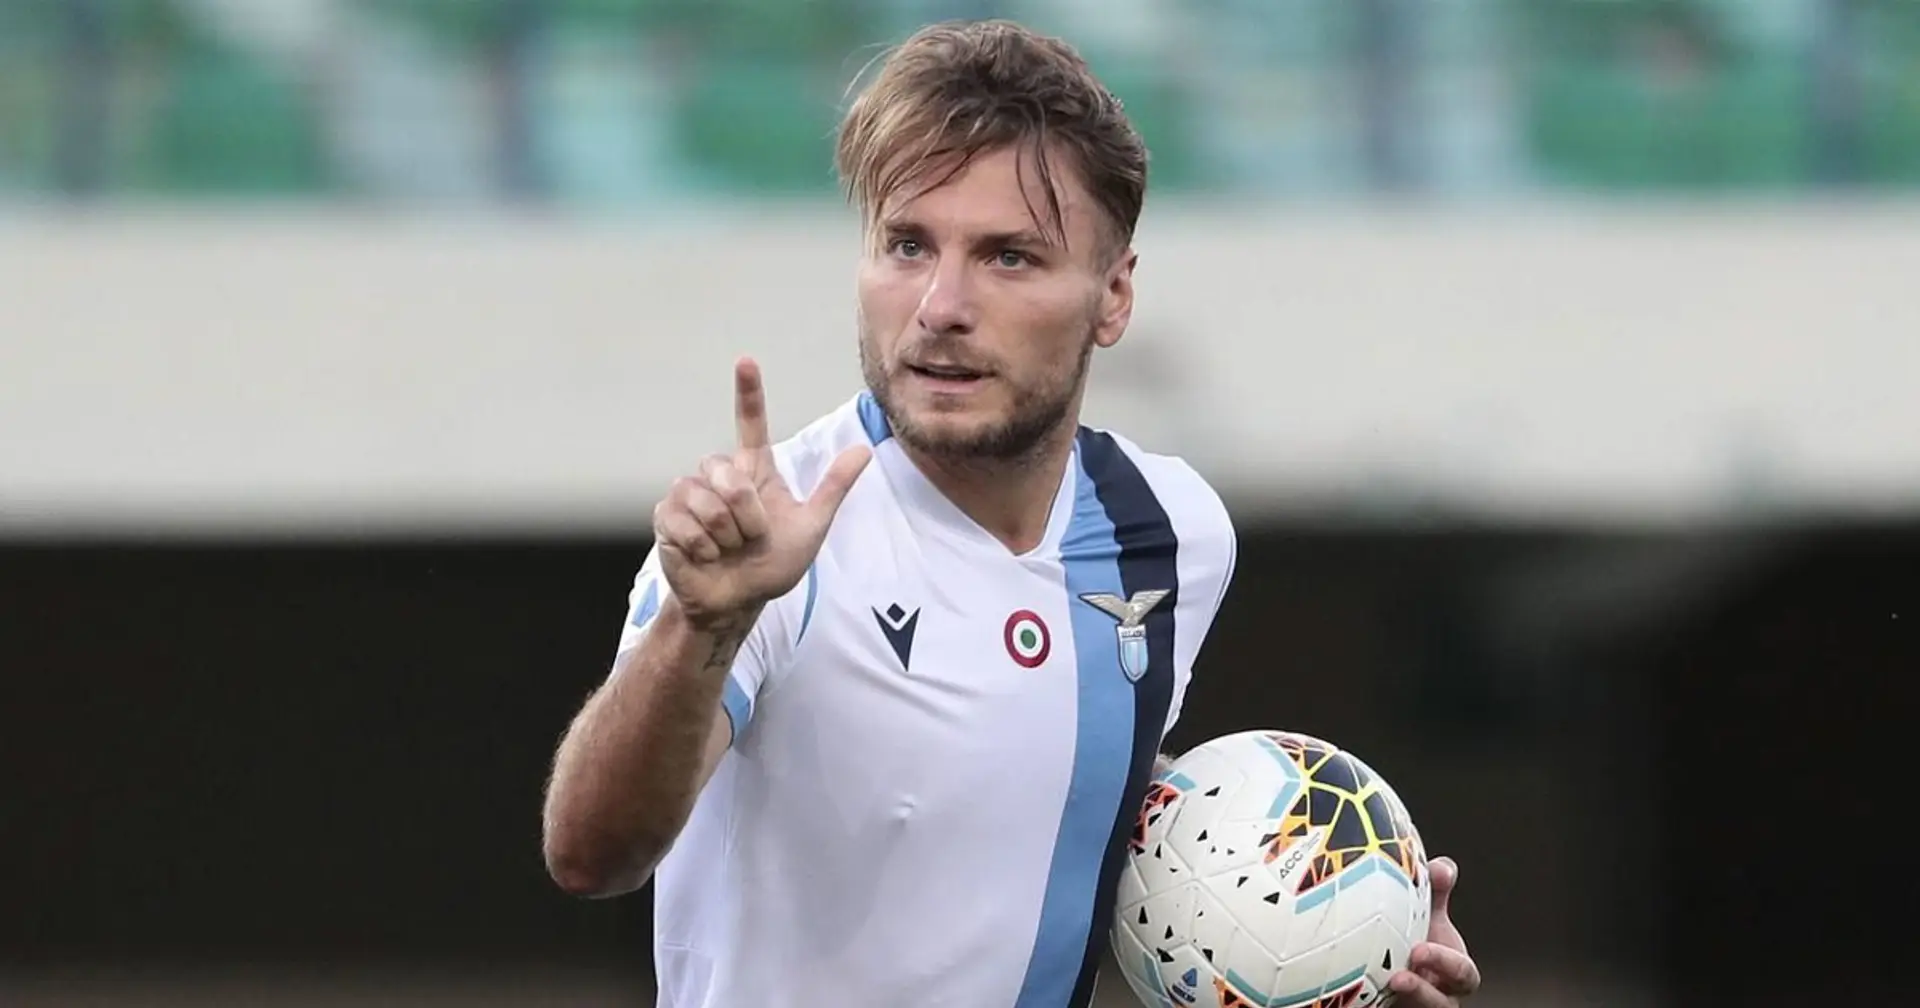 Ciro Immobile closes in on all-time Serie A record after hat-trick vs Hellas Verona